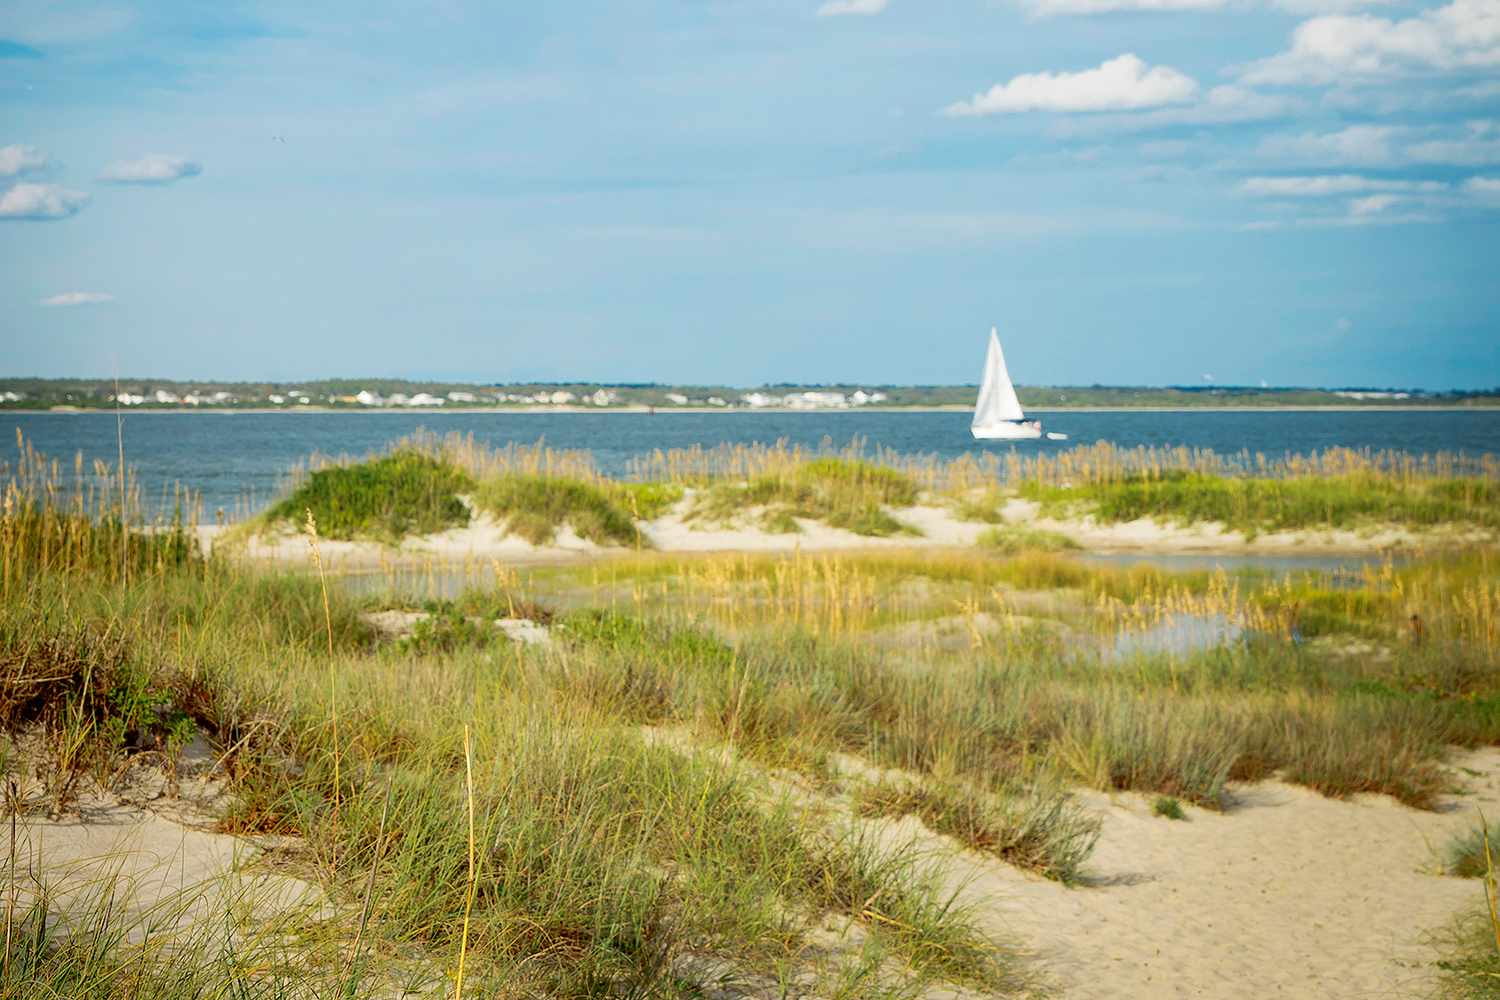   
																This Small Town on North Carolina's 'Crystal Coast' Has Some of the Most Affordable Beach Houses in the U.S. 
															 